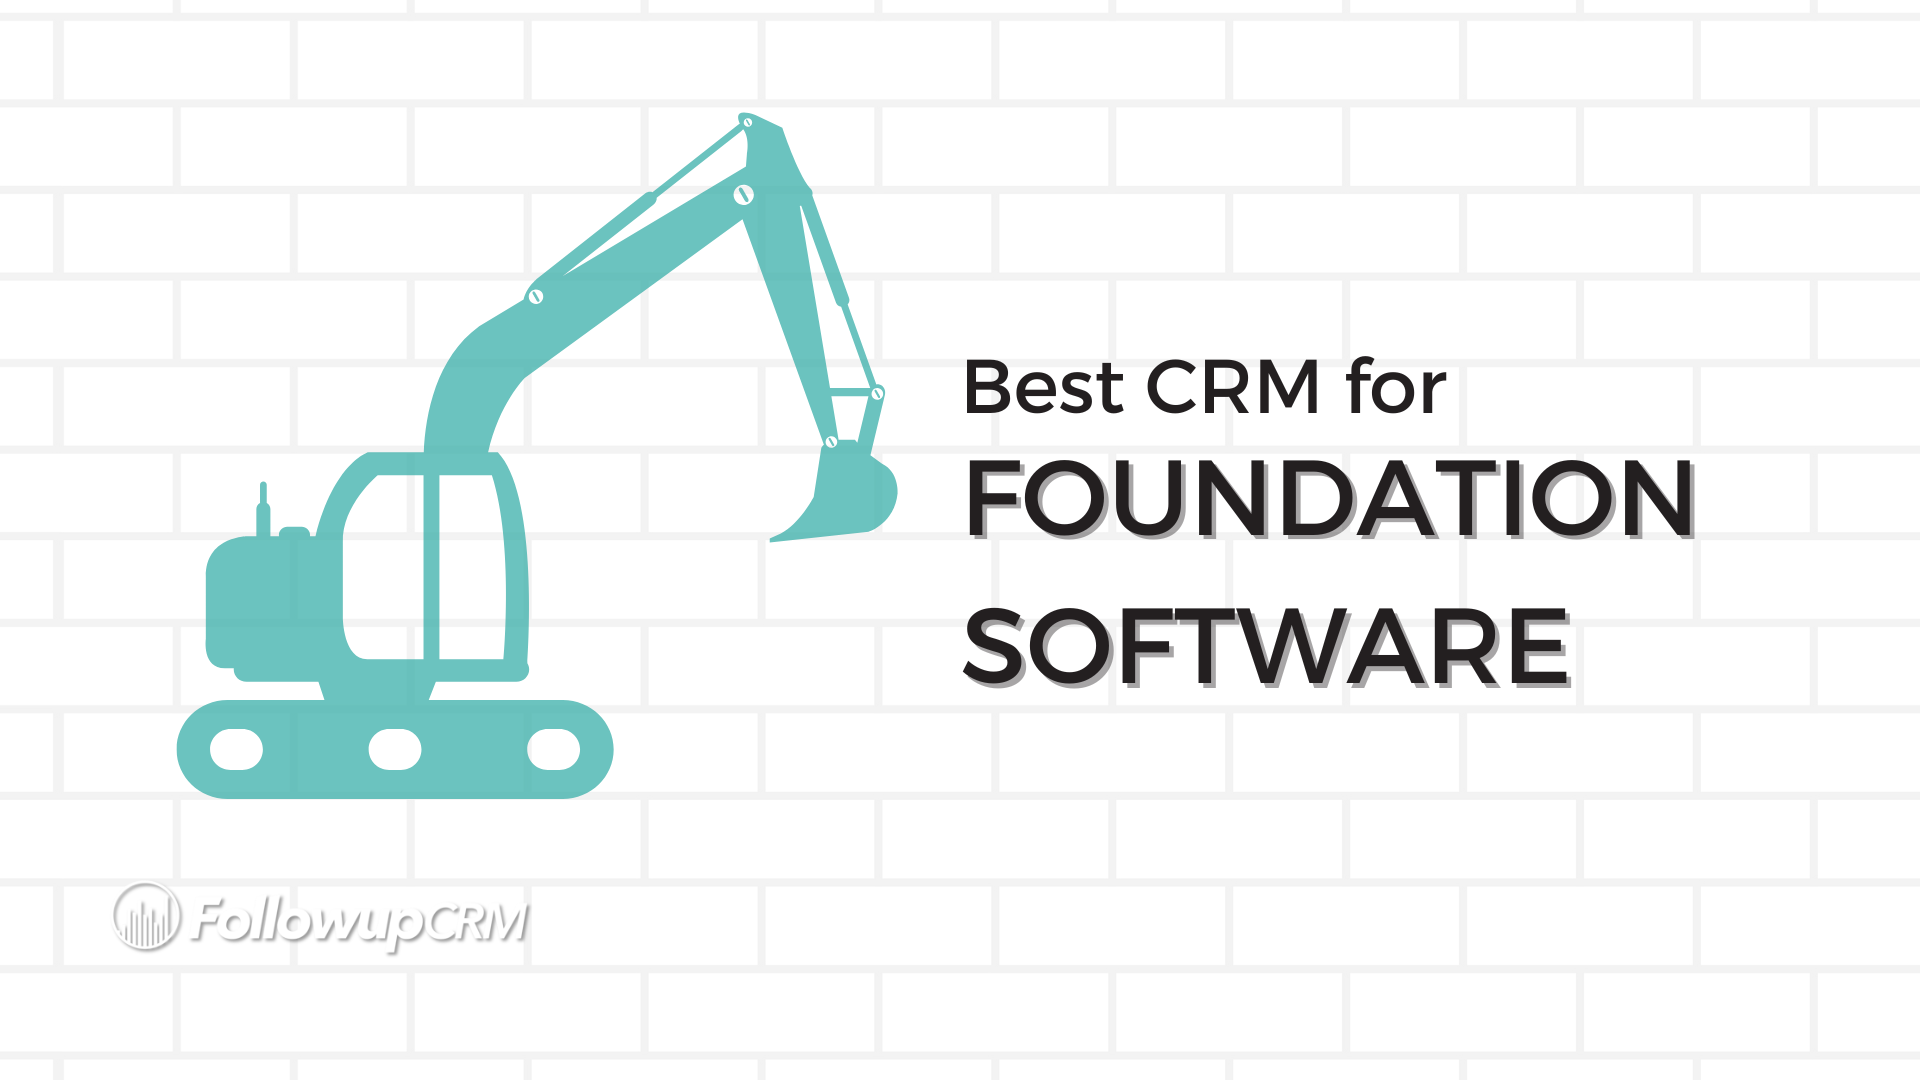 Best CRM for Foundation Software